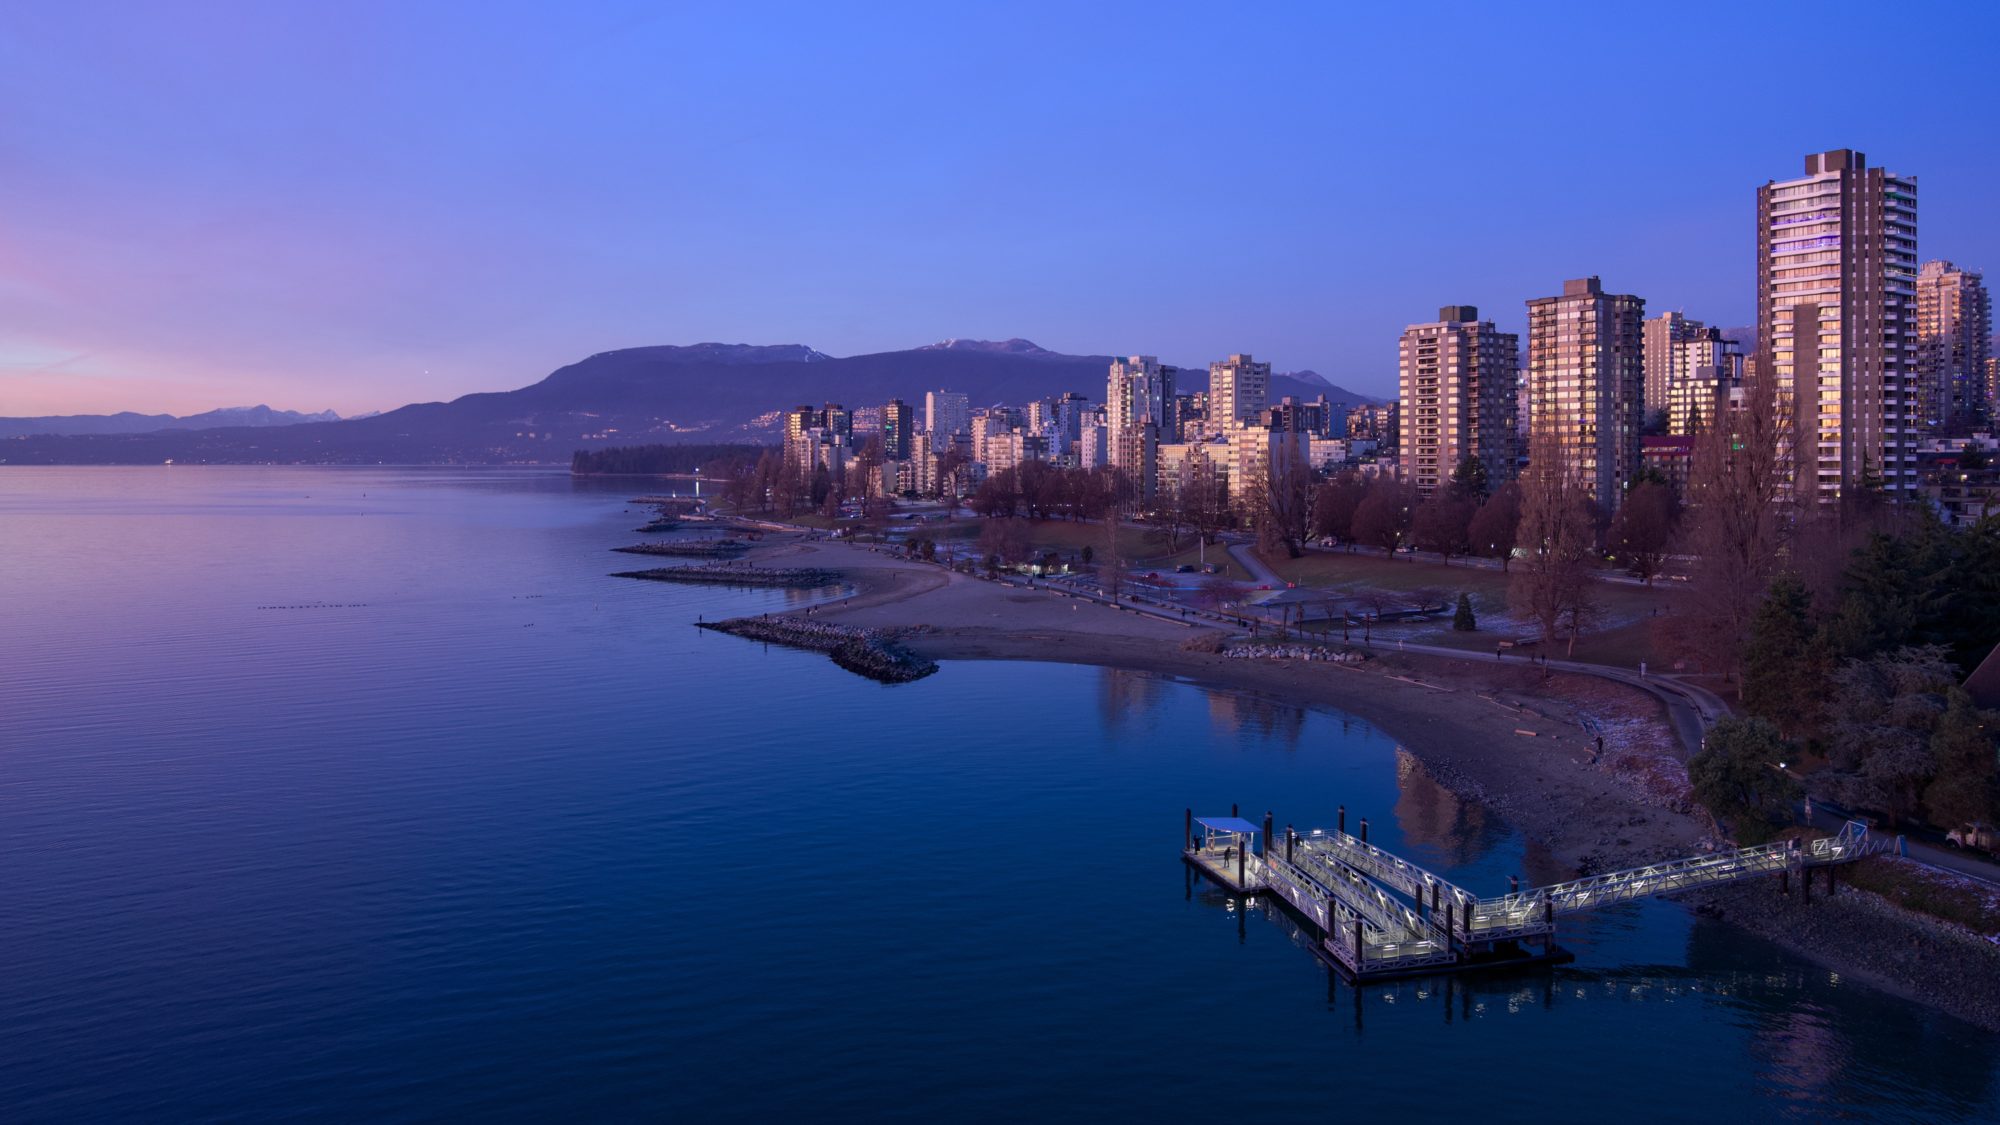 A view of the West End and Sunset Beach from Burrard Bridge. The sky is deep blue with a bit of pink on one end